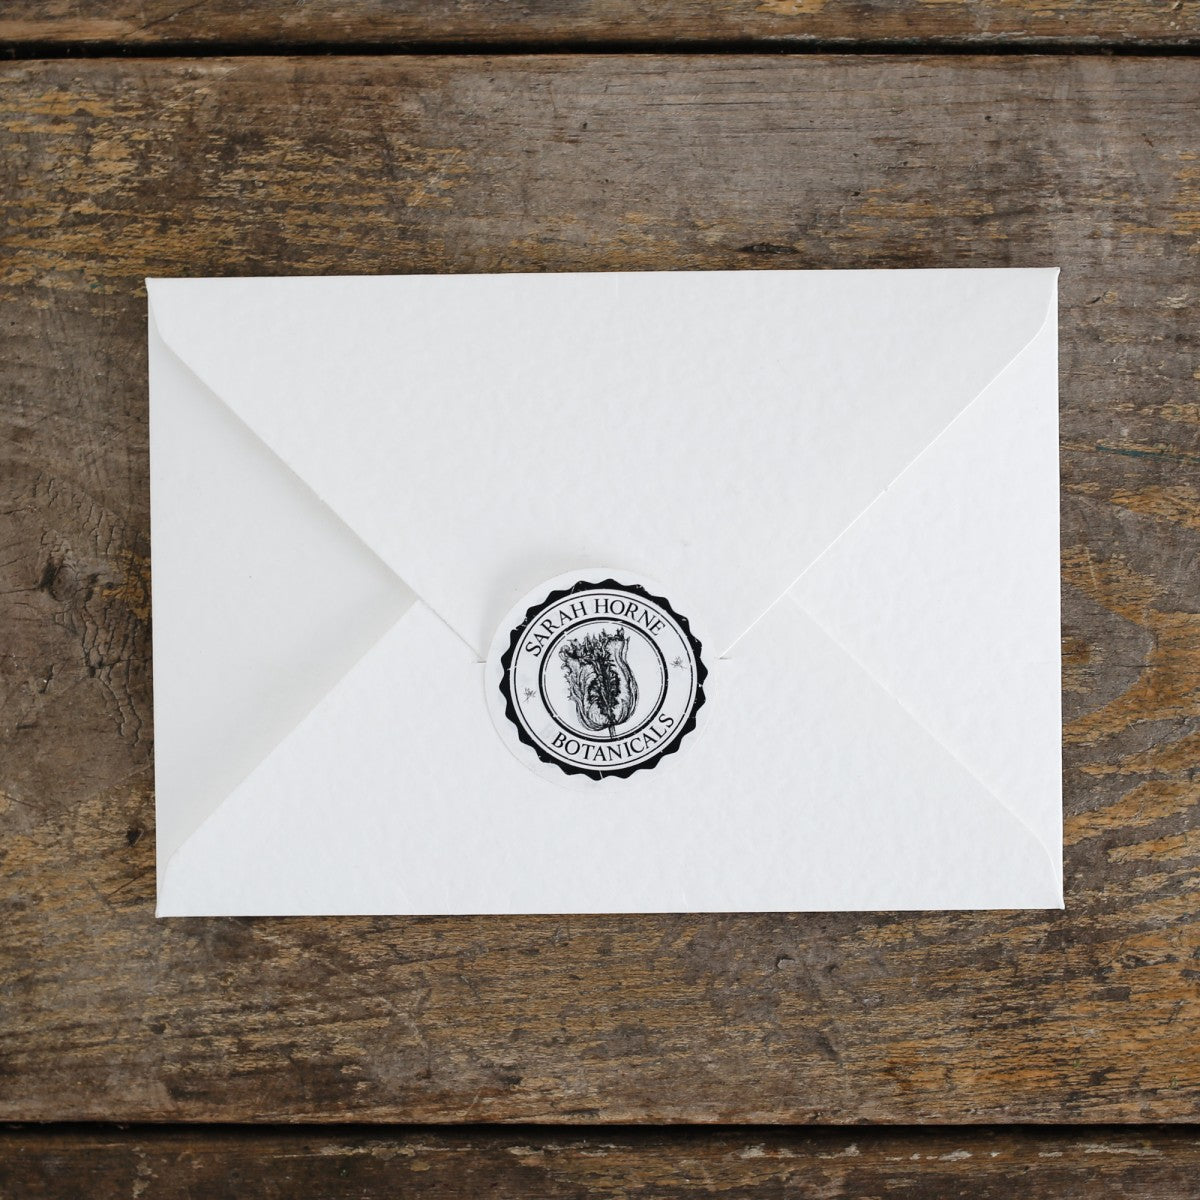 A5 Envelope and logo seal